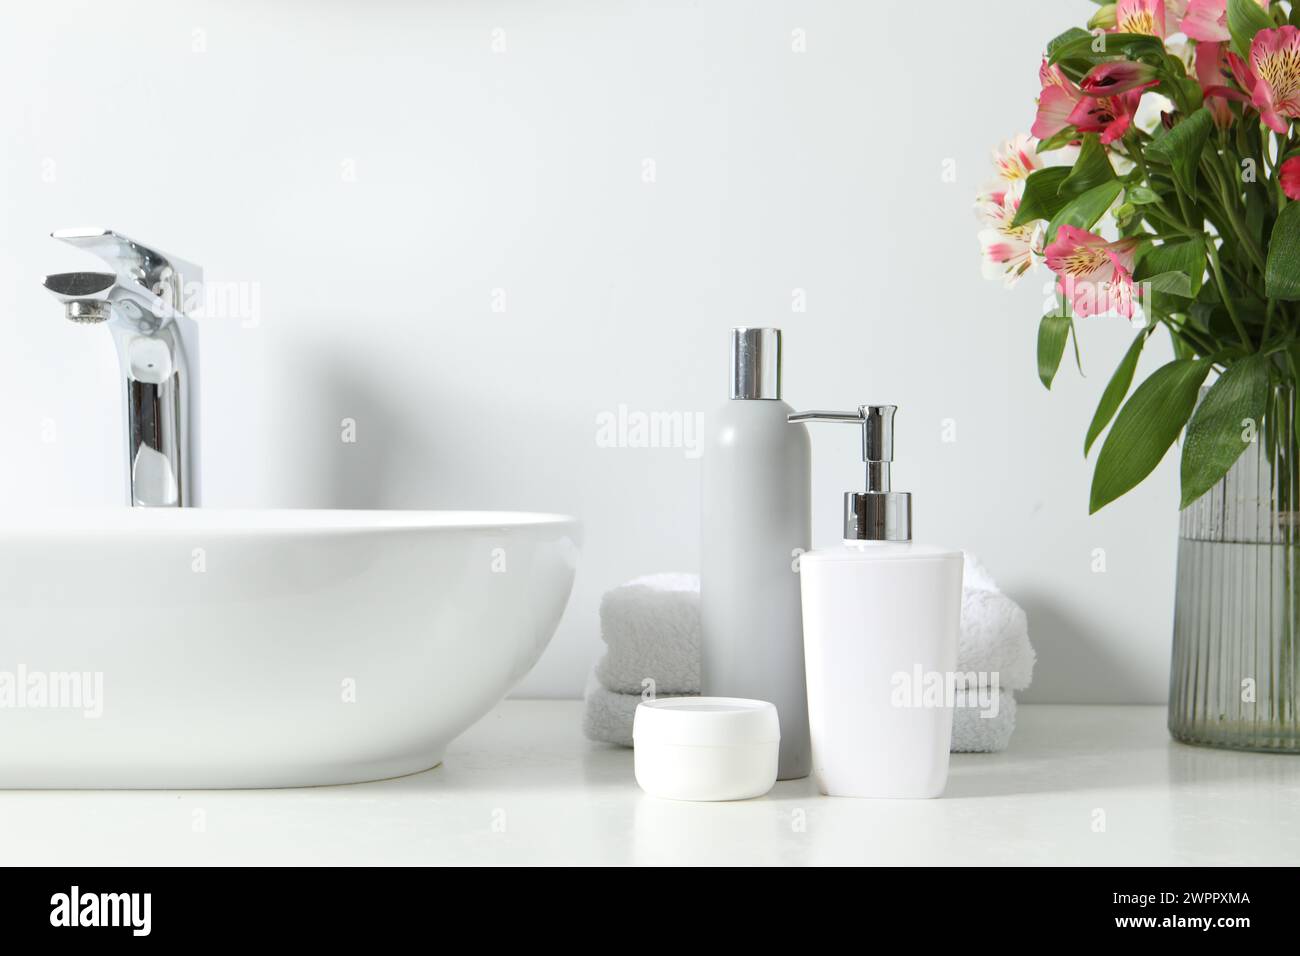 Vase with beautiful Alstroemeria flowers and toiletries near sink in bathroom Stock Photo